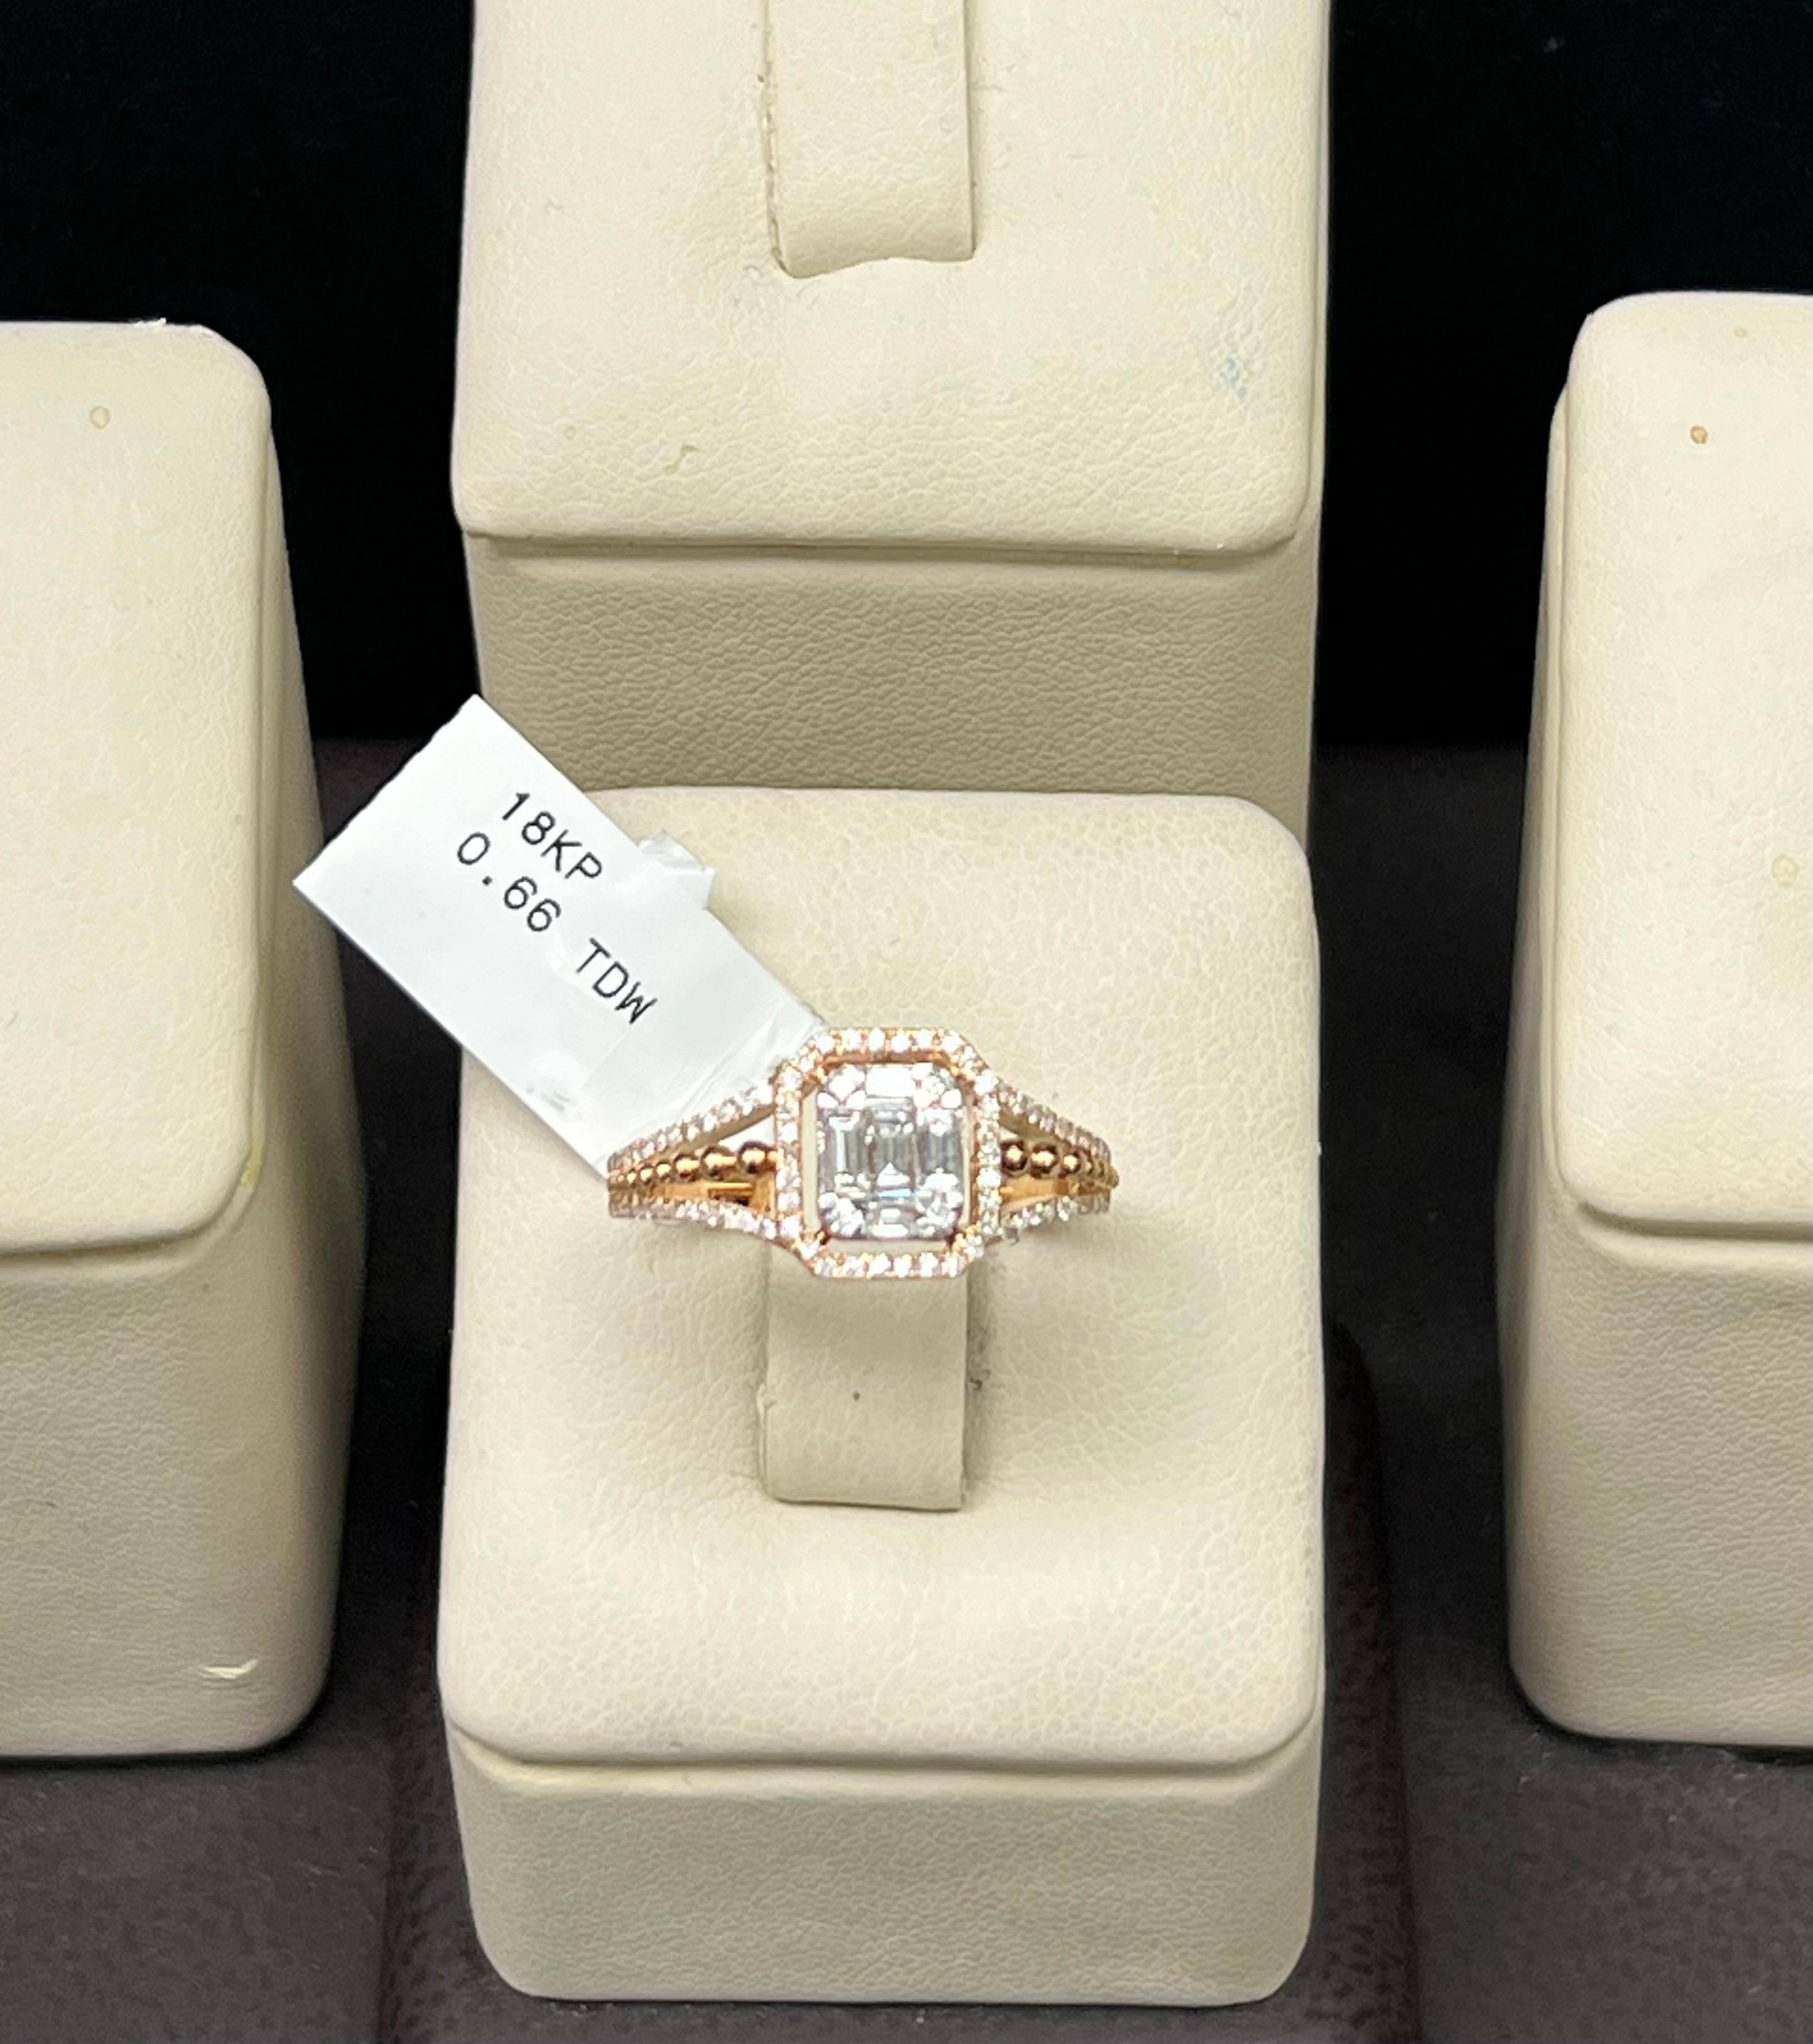 Solid 18K Rose Gold

Natural Round and Baguette Diamonds .66 Total Diamond Weight

G-H Color SI Clarity 

Size 6.5 - Sizable 

Free Insured Shipping